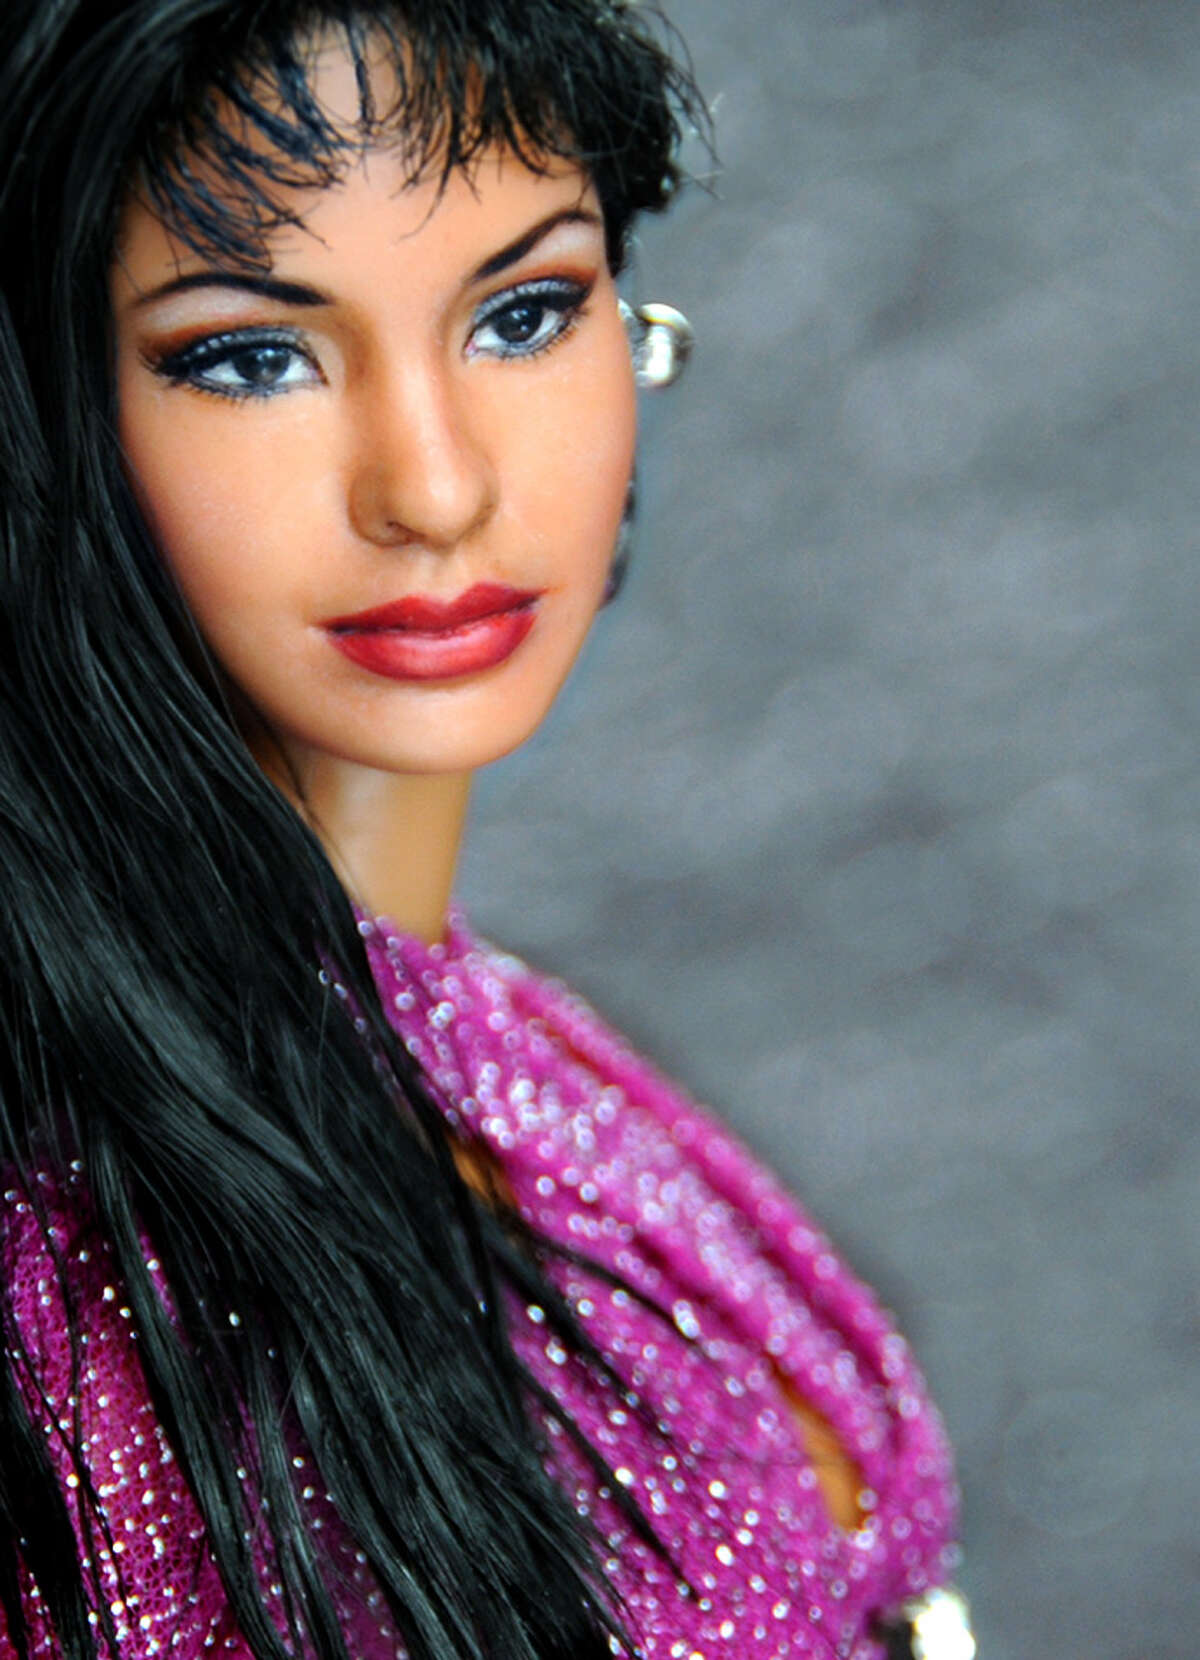 With the 20th anniversary of Selena’s death approaching, an artist has repainted and sold a Selena Quintanilla doll for over a thousand dollars on eBay.